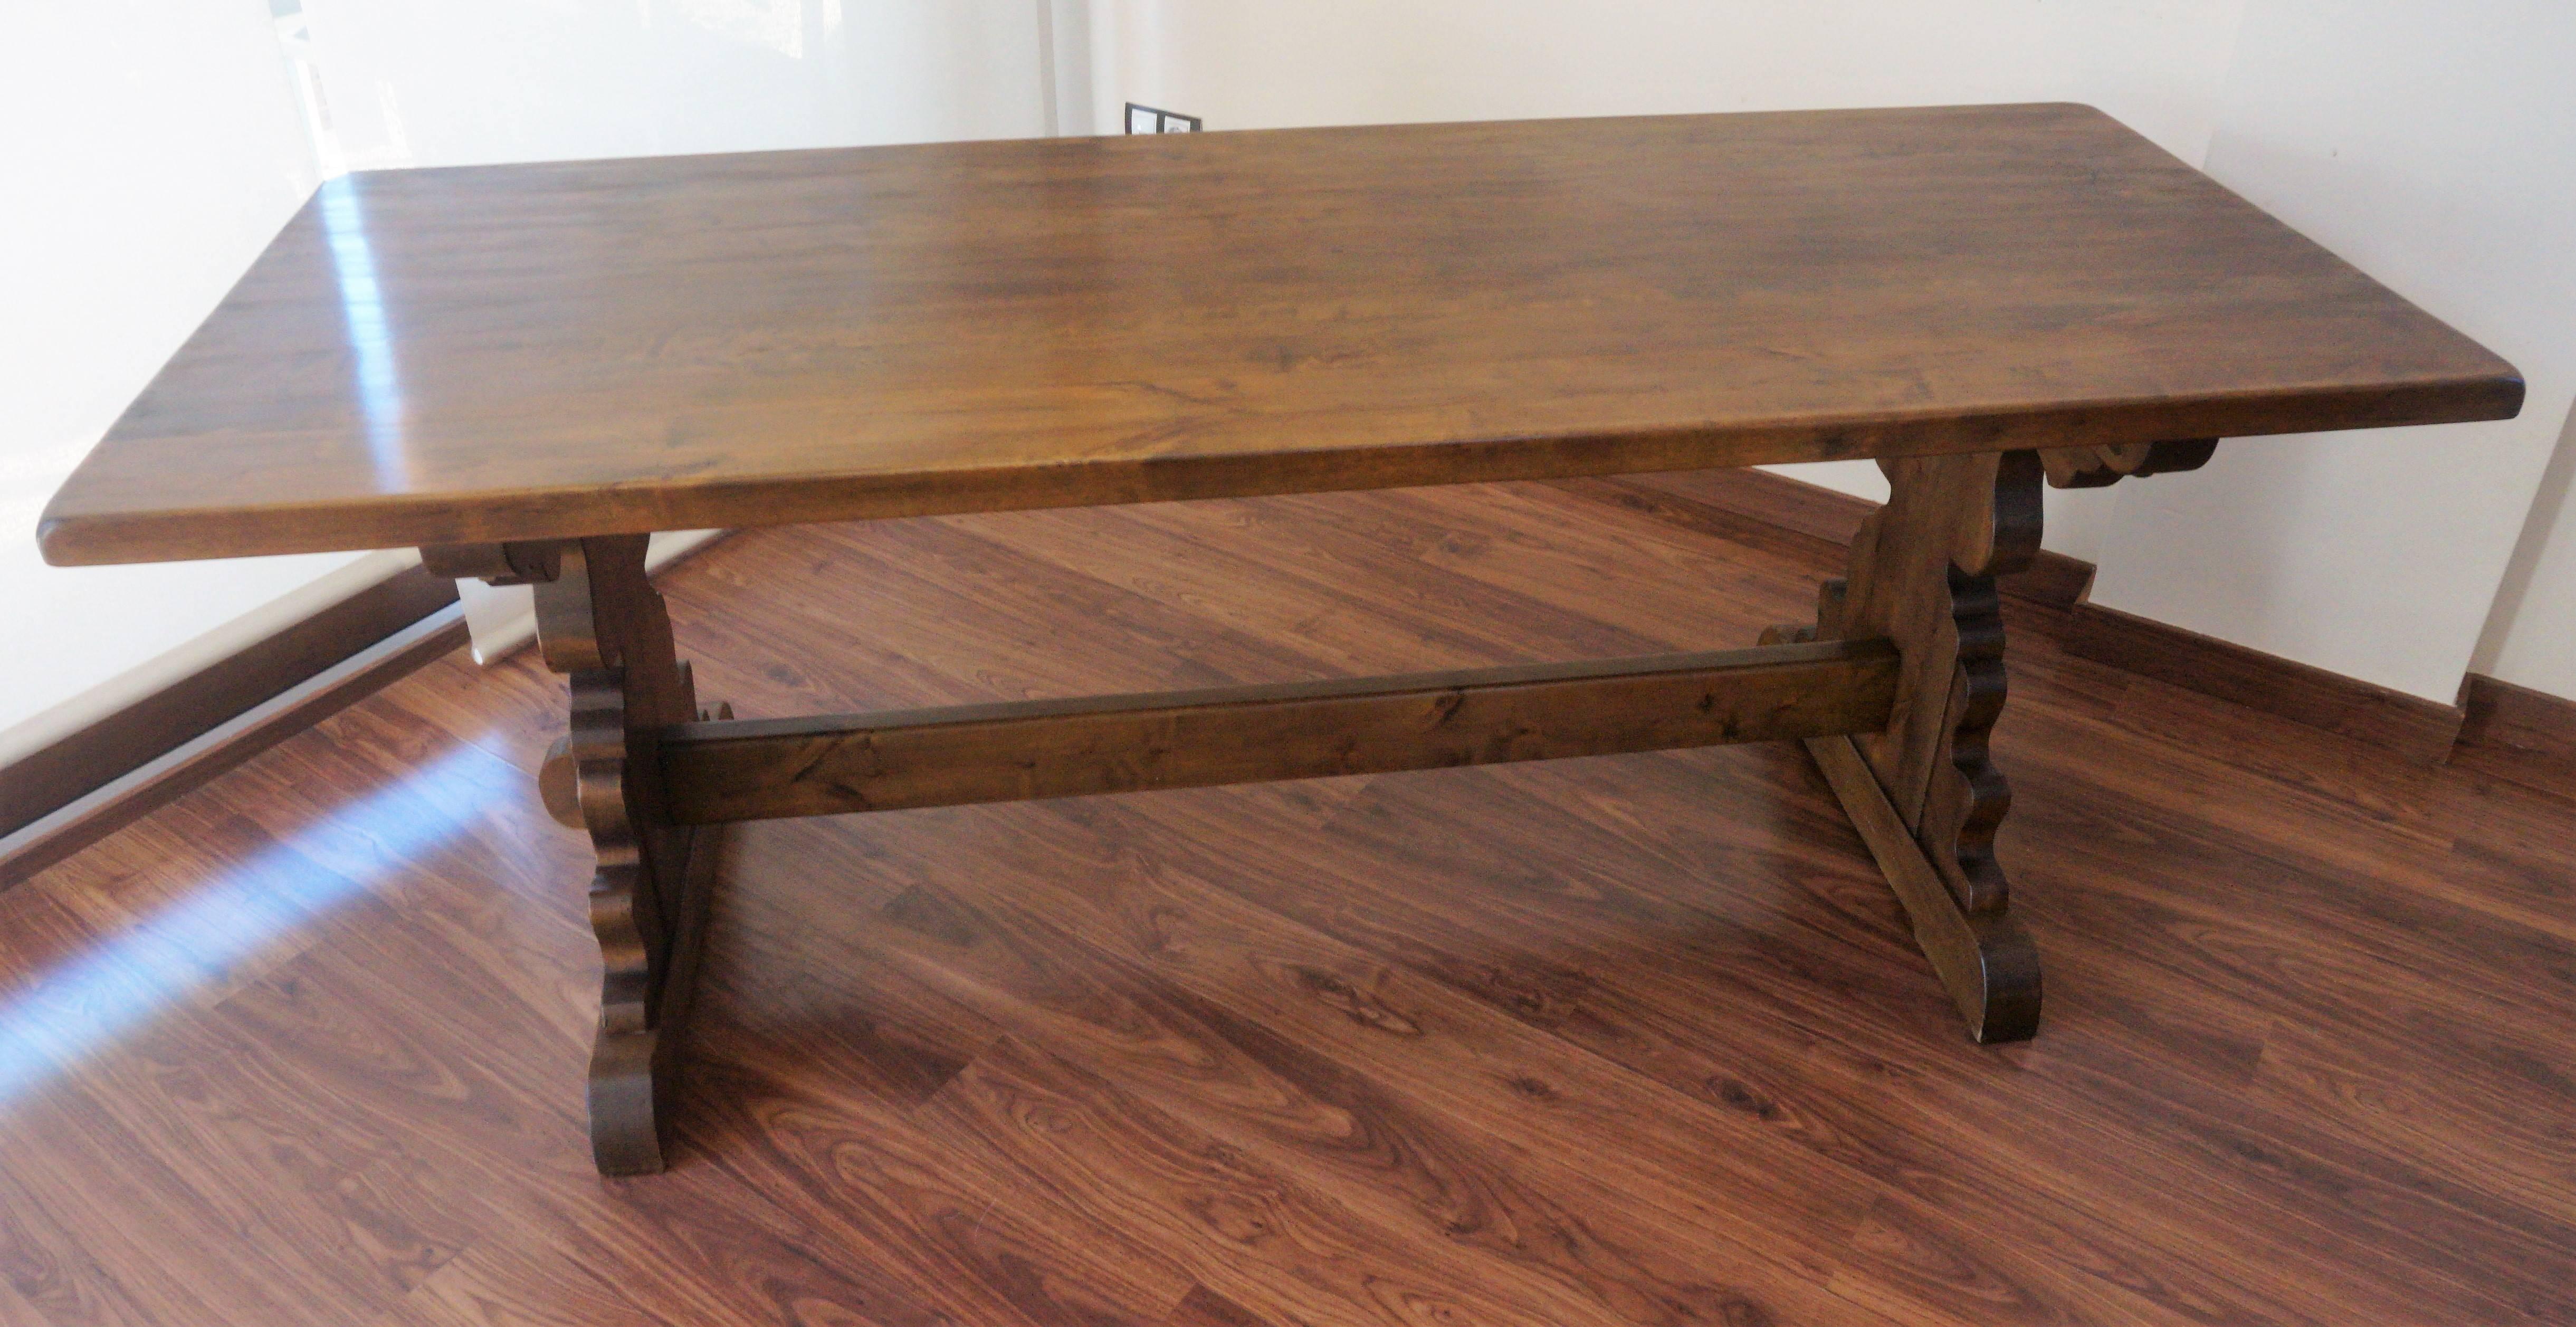 20th Century Spanish Rustic Dining Room Table with Lyre Leg